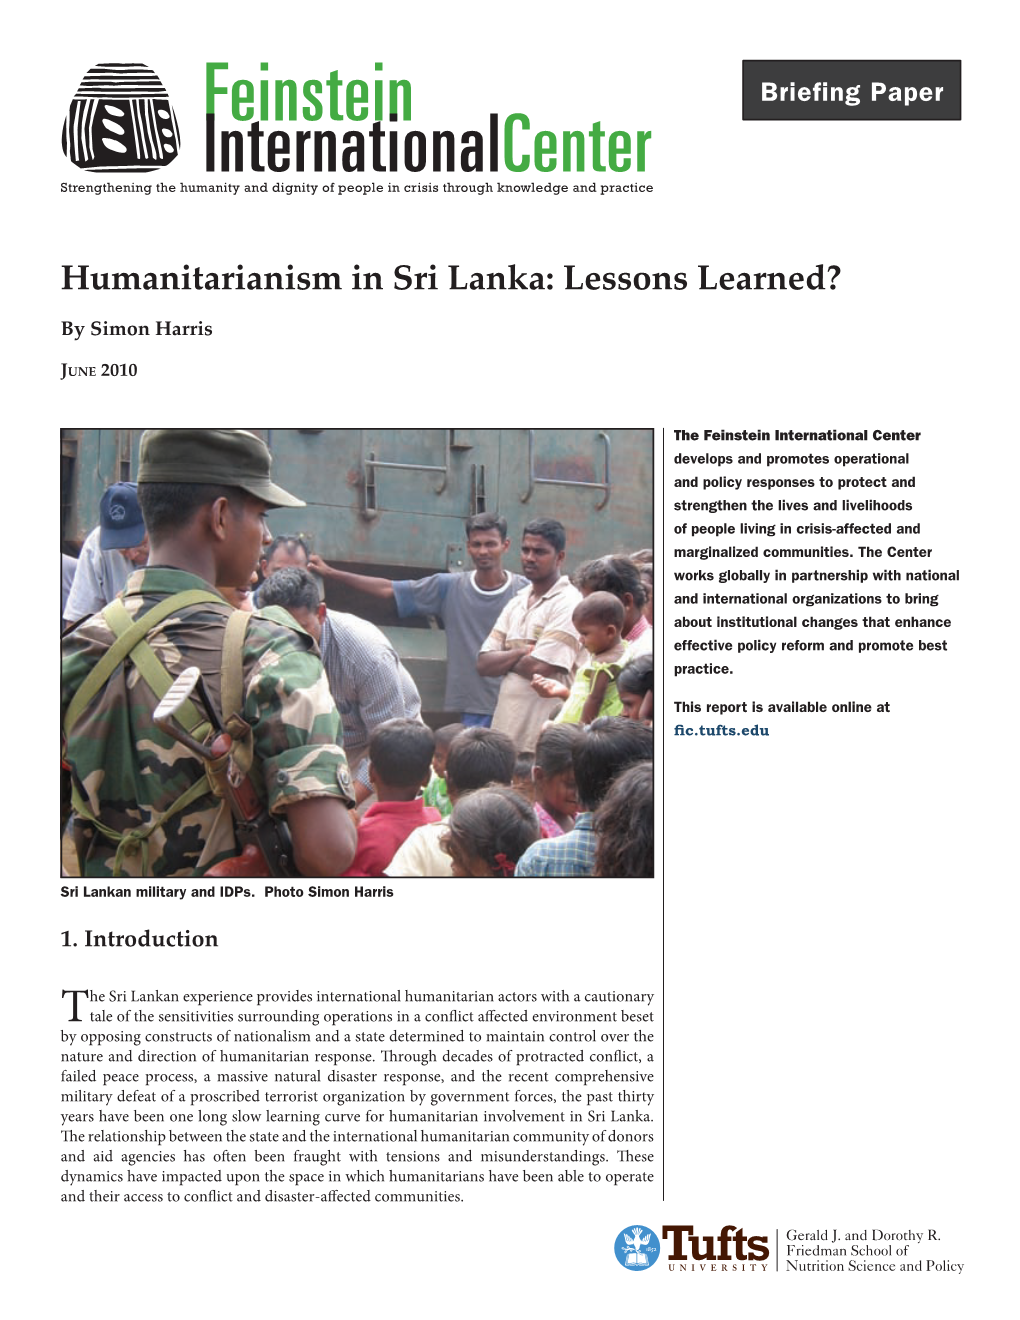 Humanitarianism in Sri Lanka: Lessons Learned? by Simon Harris